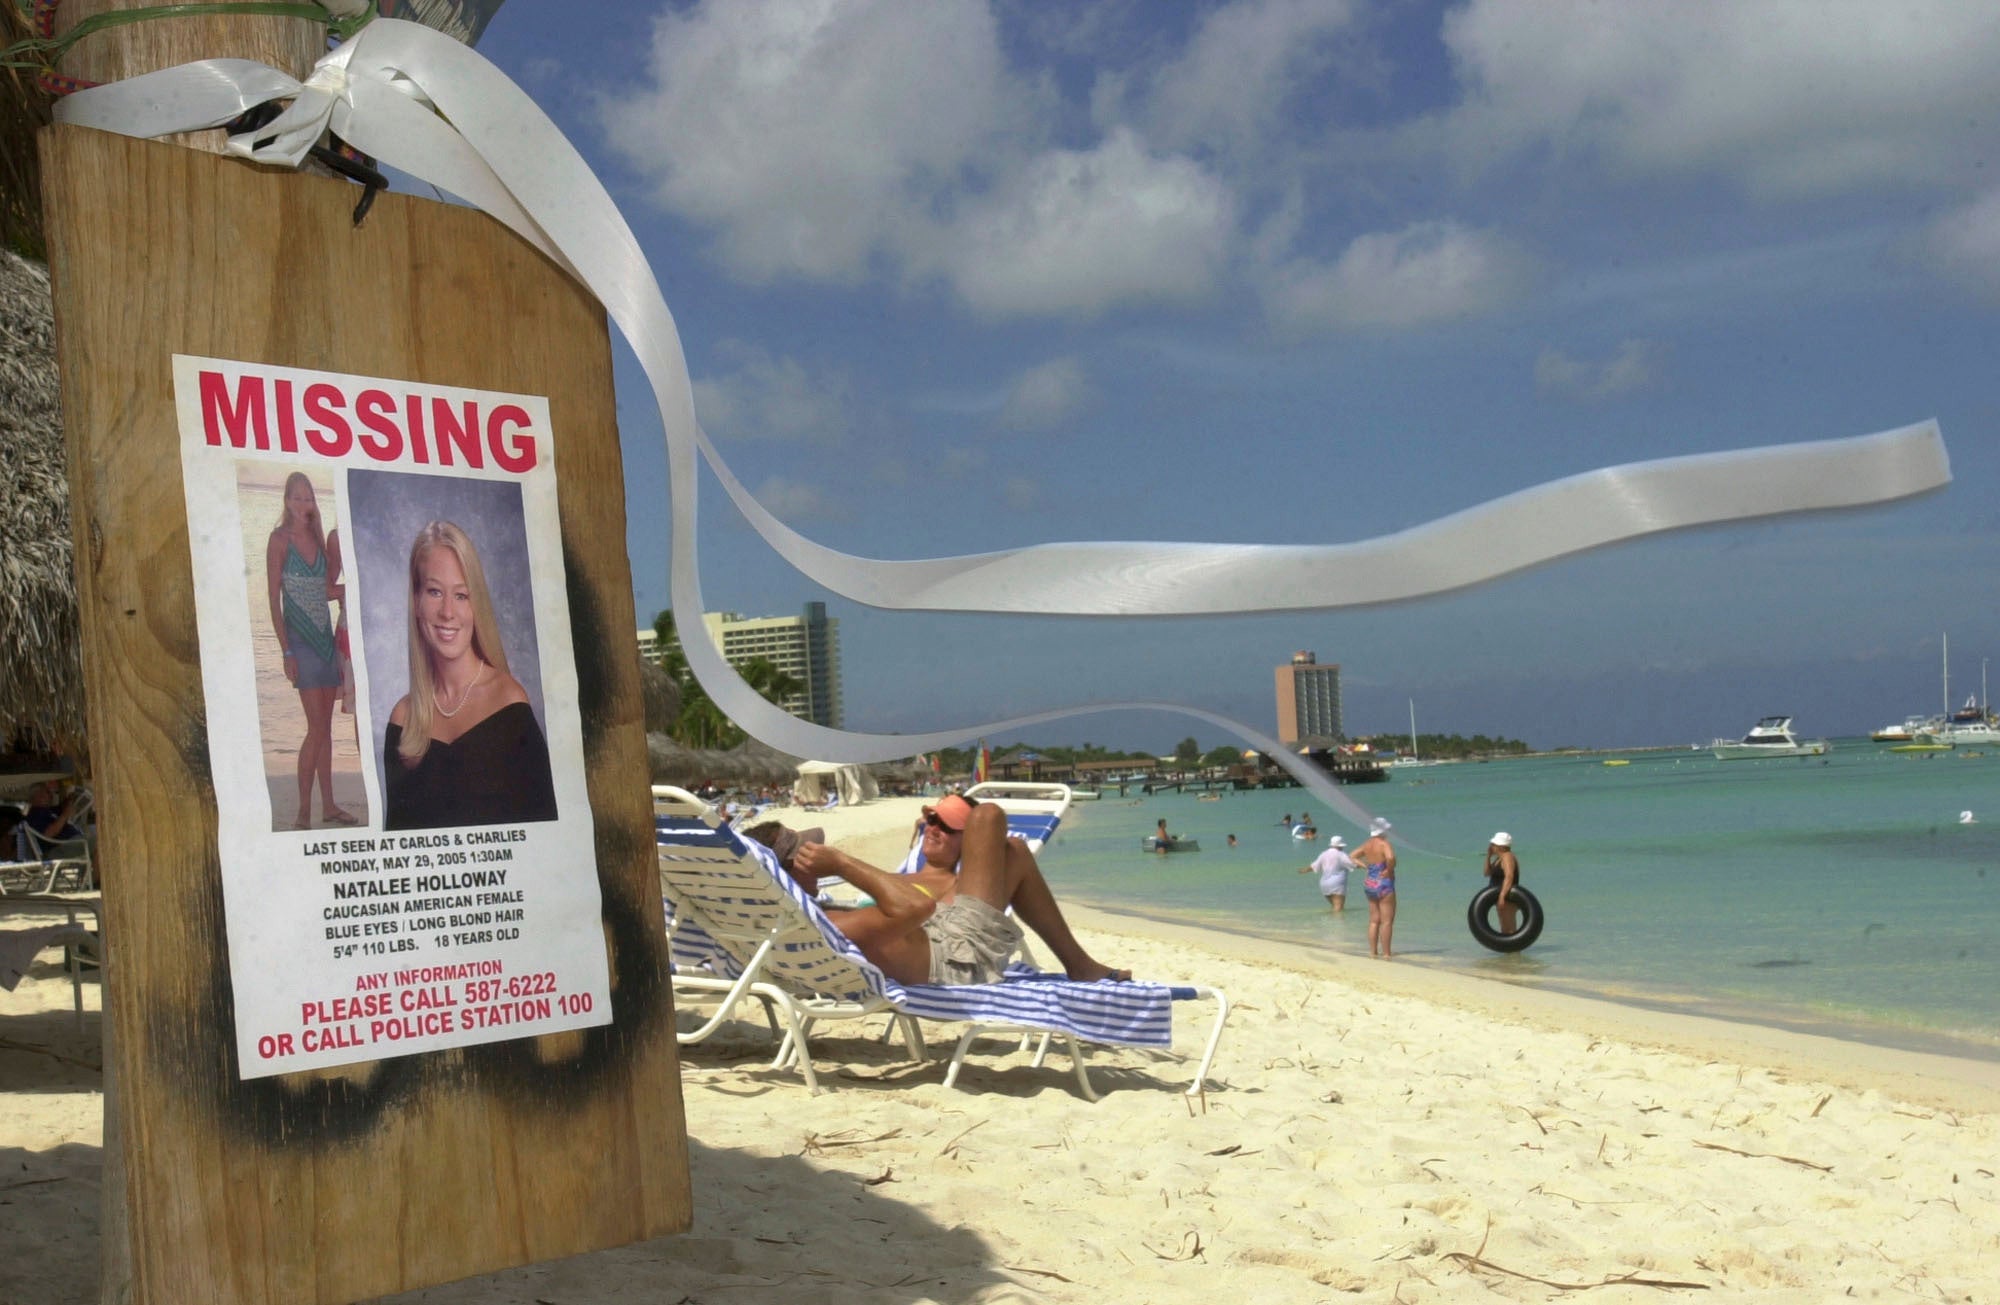 Pictures of Natalee Holloway, an Alabama high school graduate who disappeared while on a graduation trip to Aruba, are posted all over the island